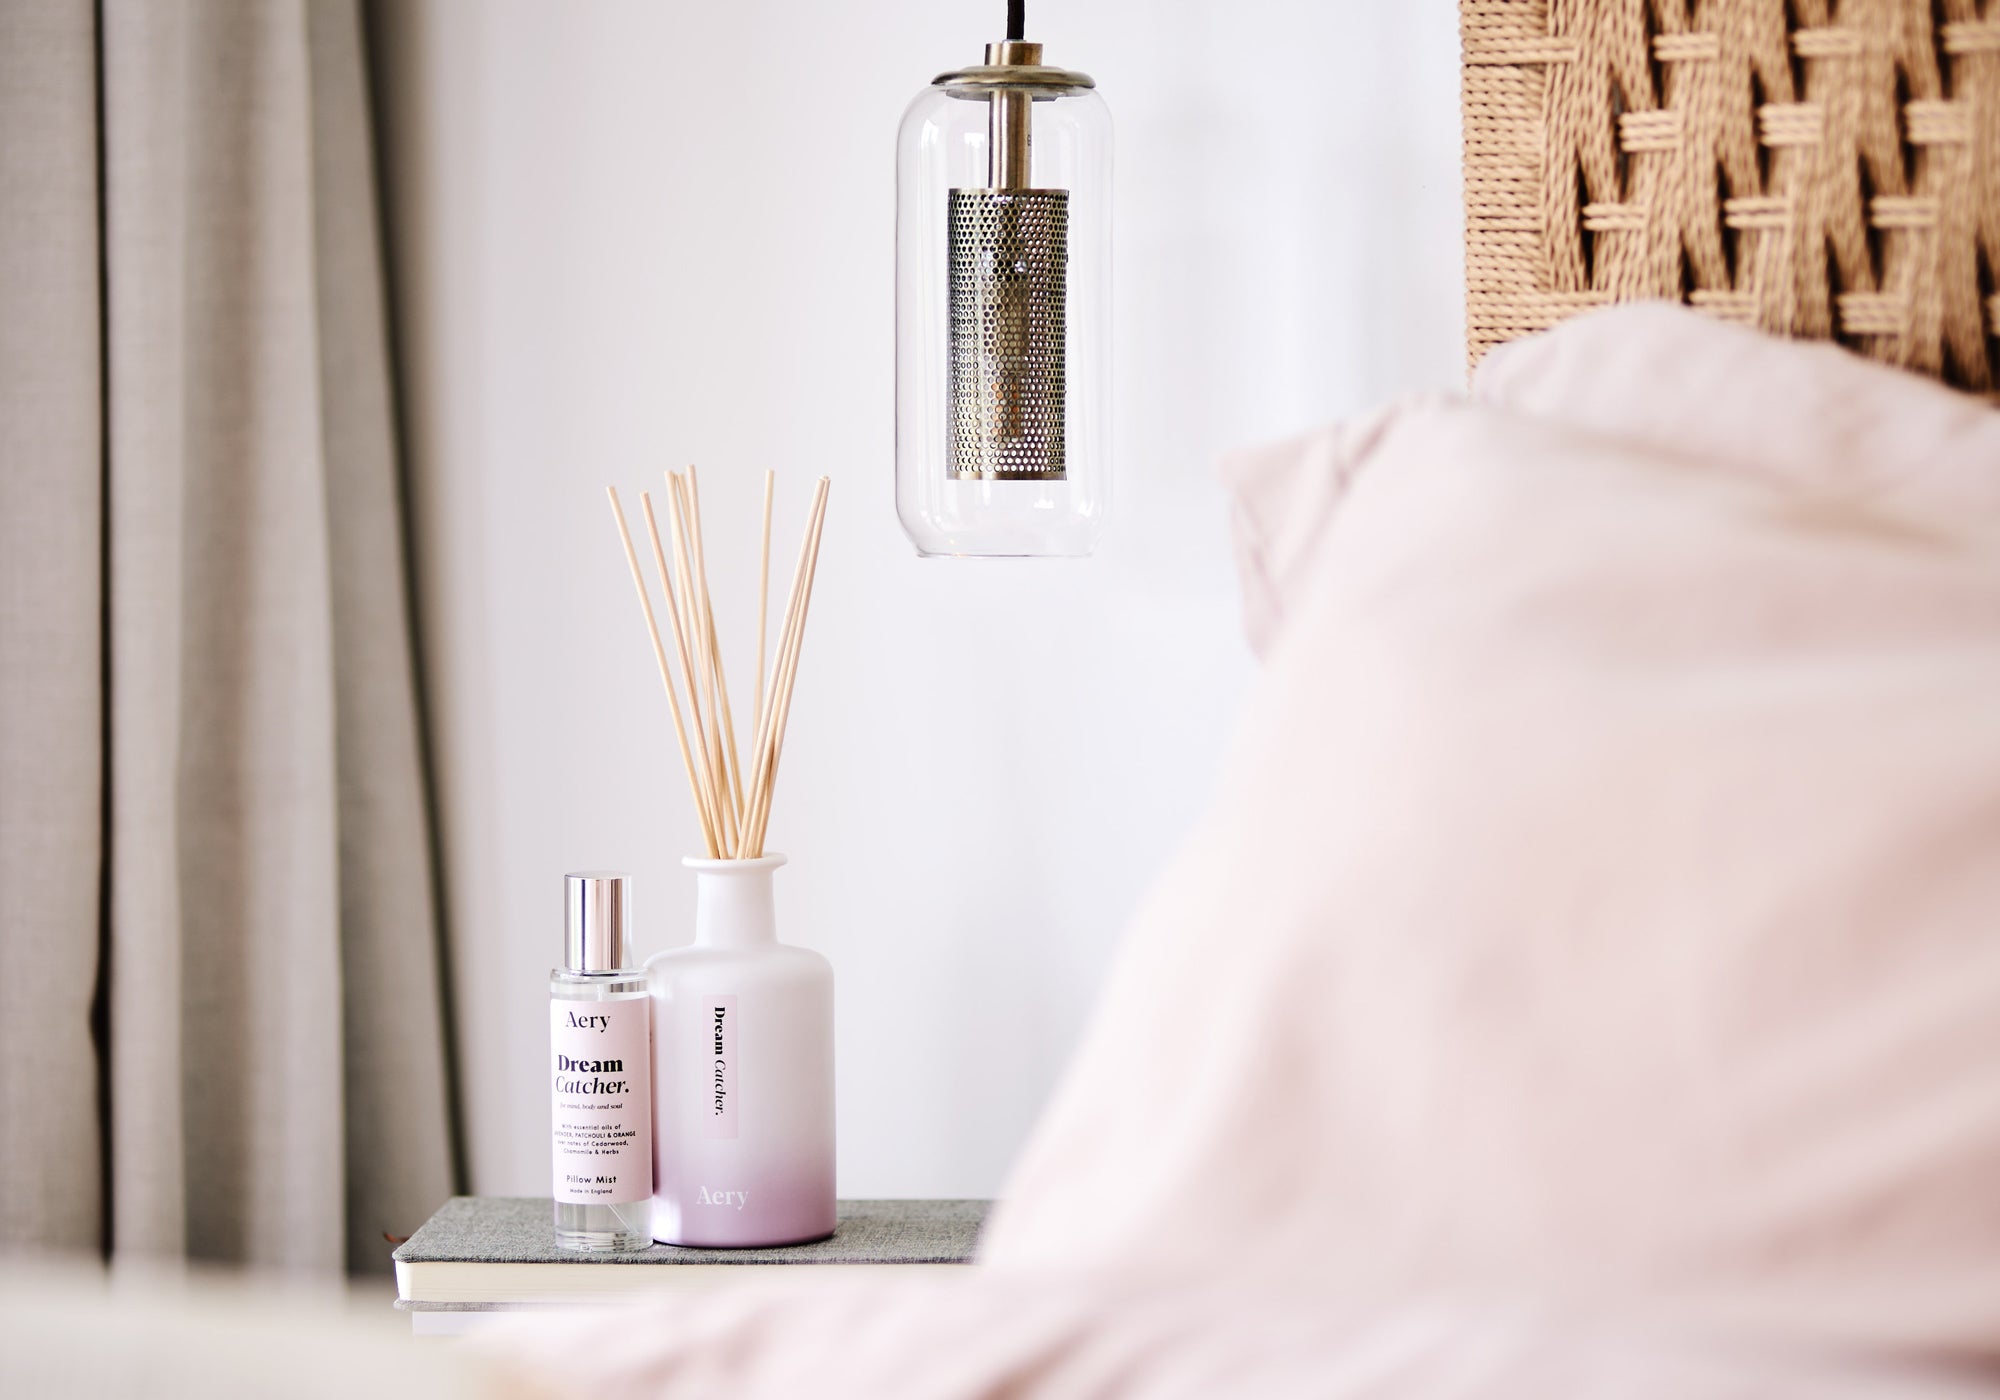 bedside setting with dream catcher reed diffuser displayed next to matching pillow spray with bedside lamp and pink bedding